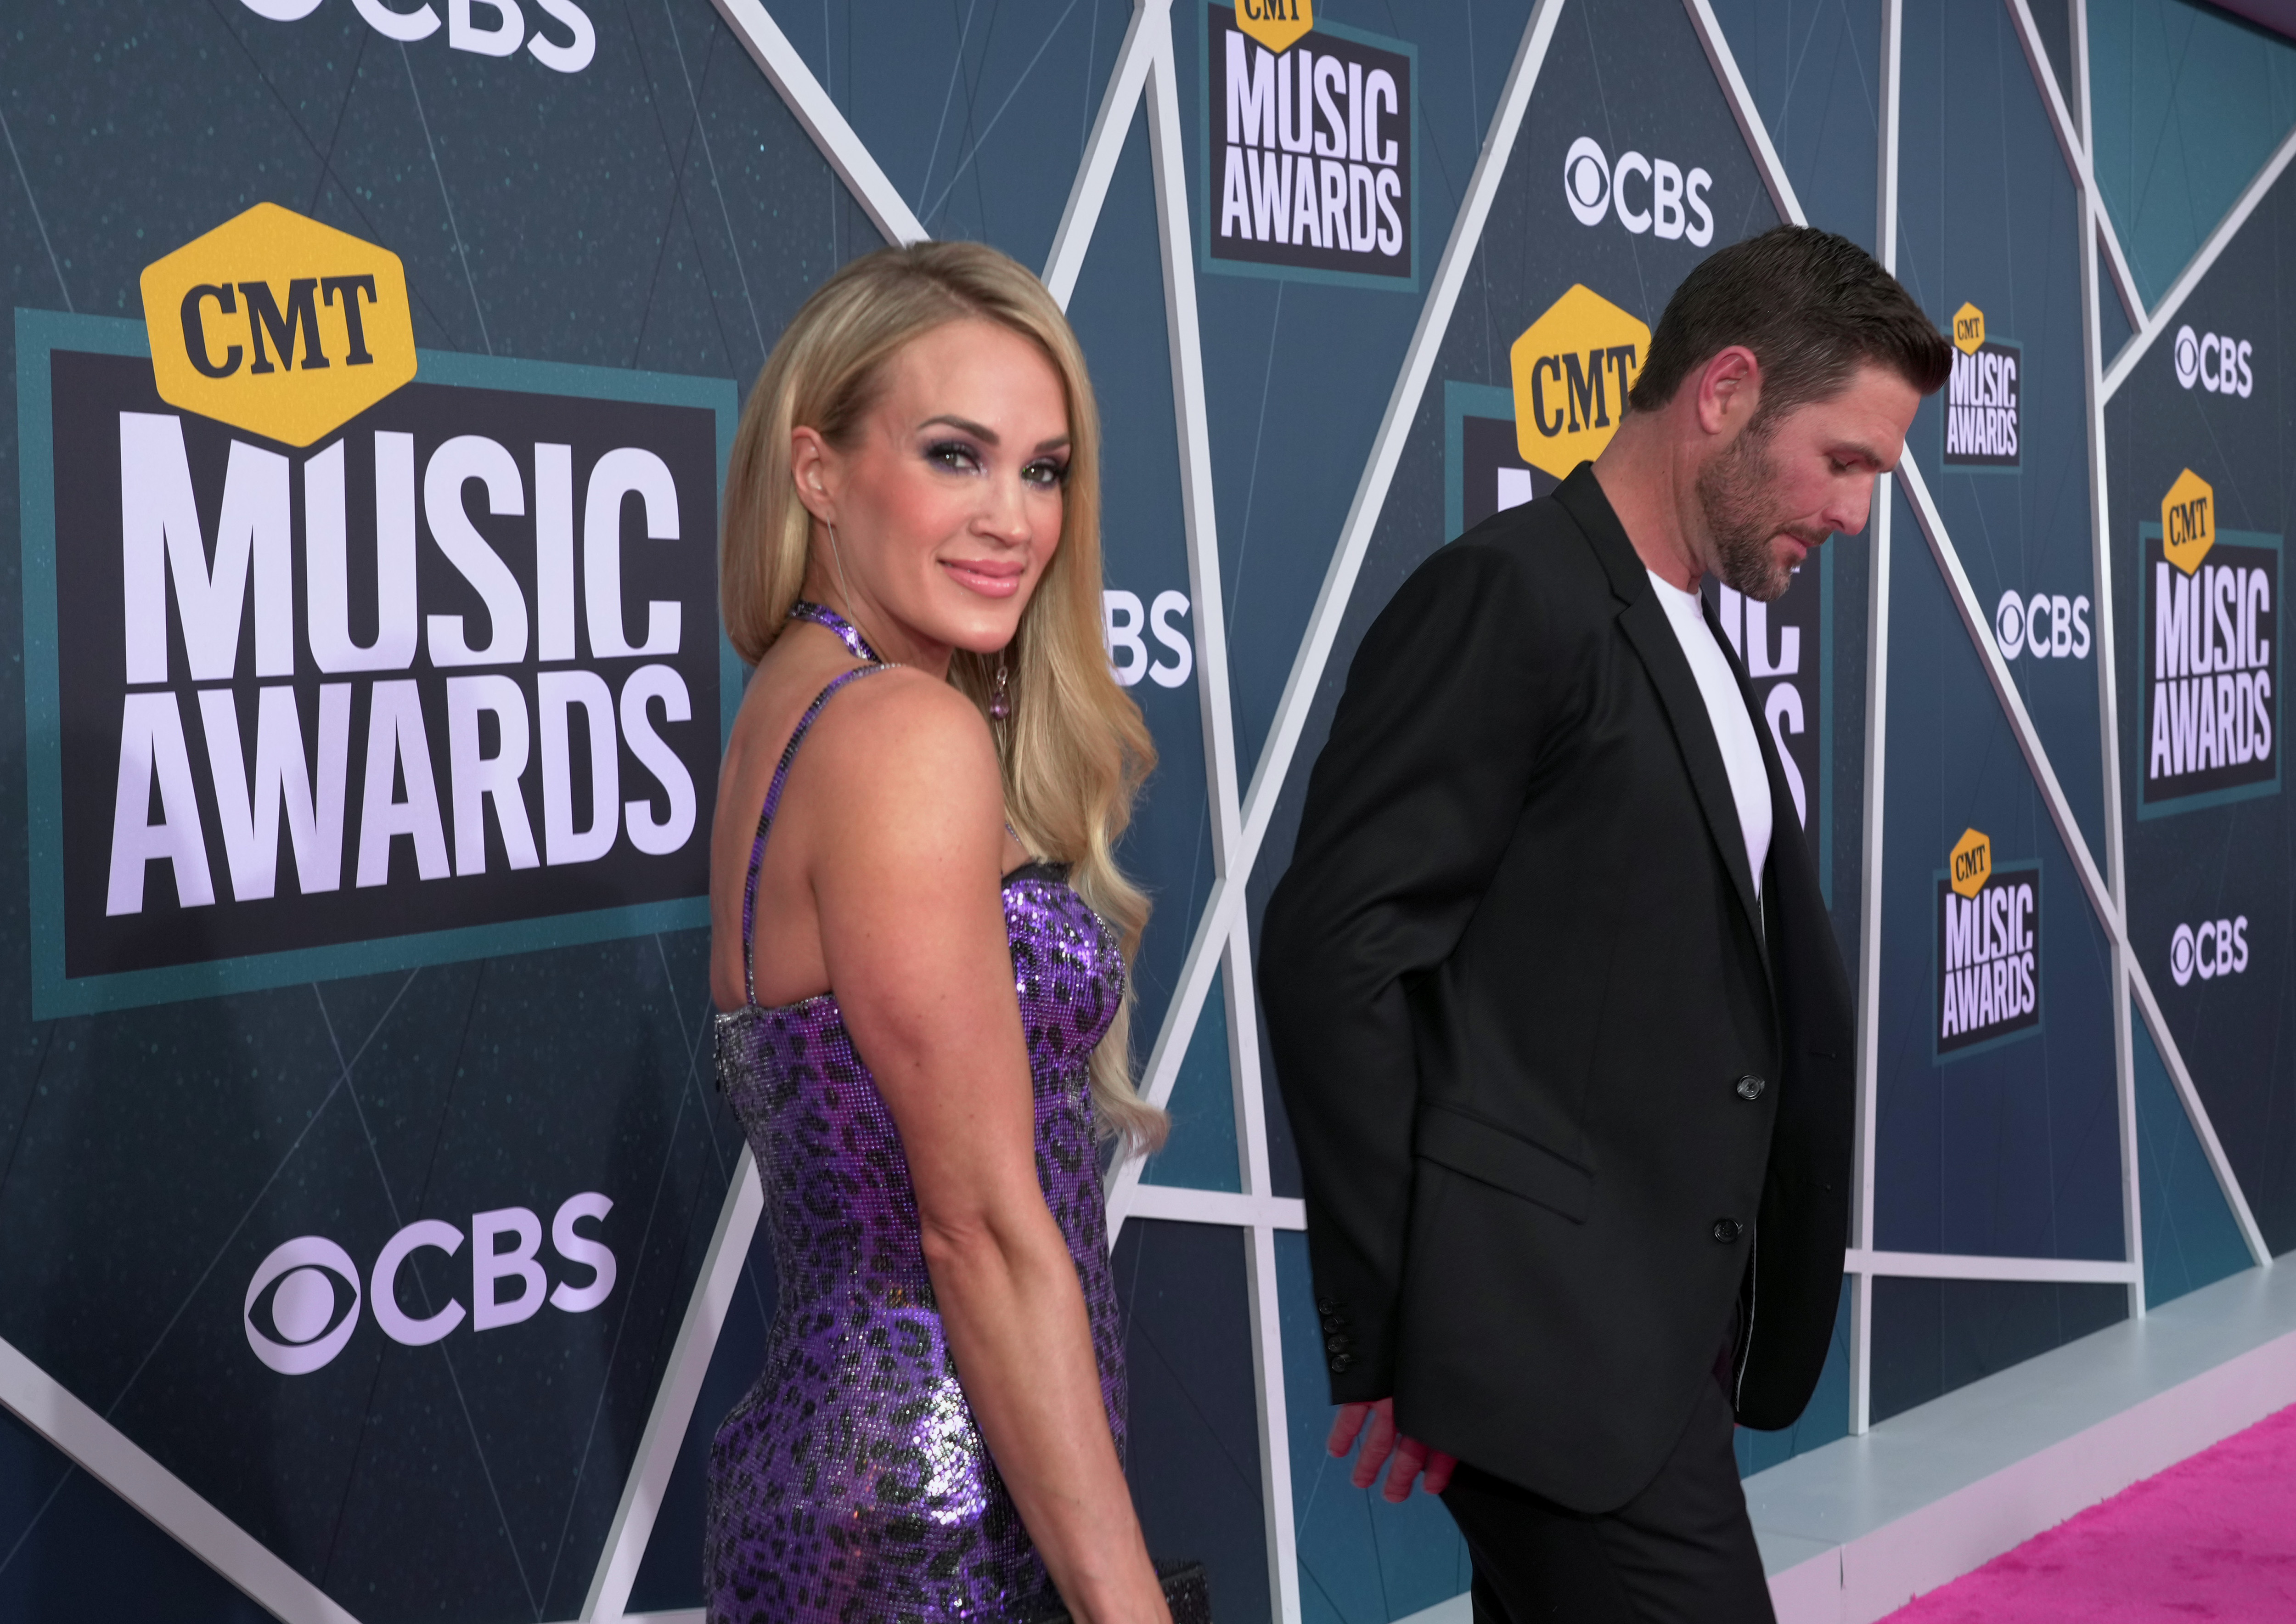 Carrie Underwood and her husband Mike Fisher have been married since 2010